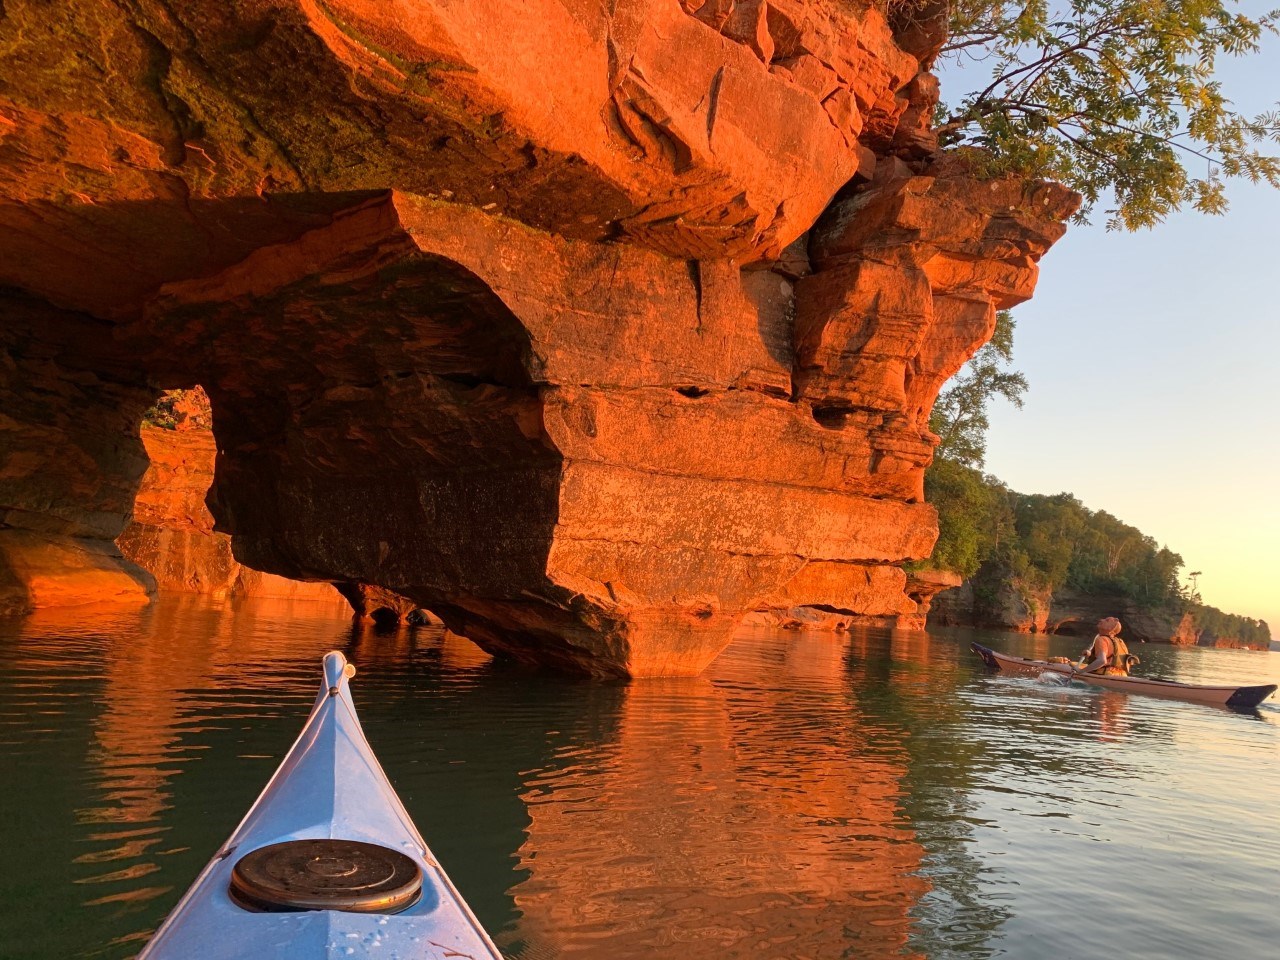 Two kayakers on the lake looking at a sandstone arch.